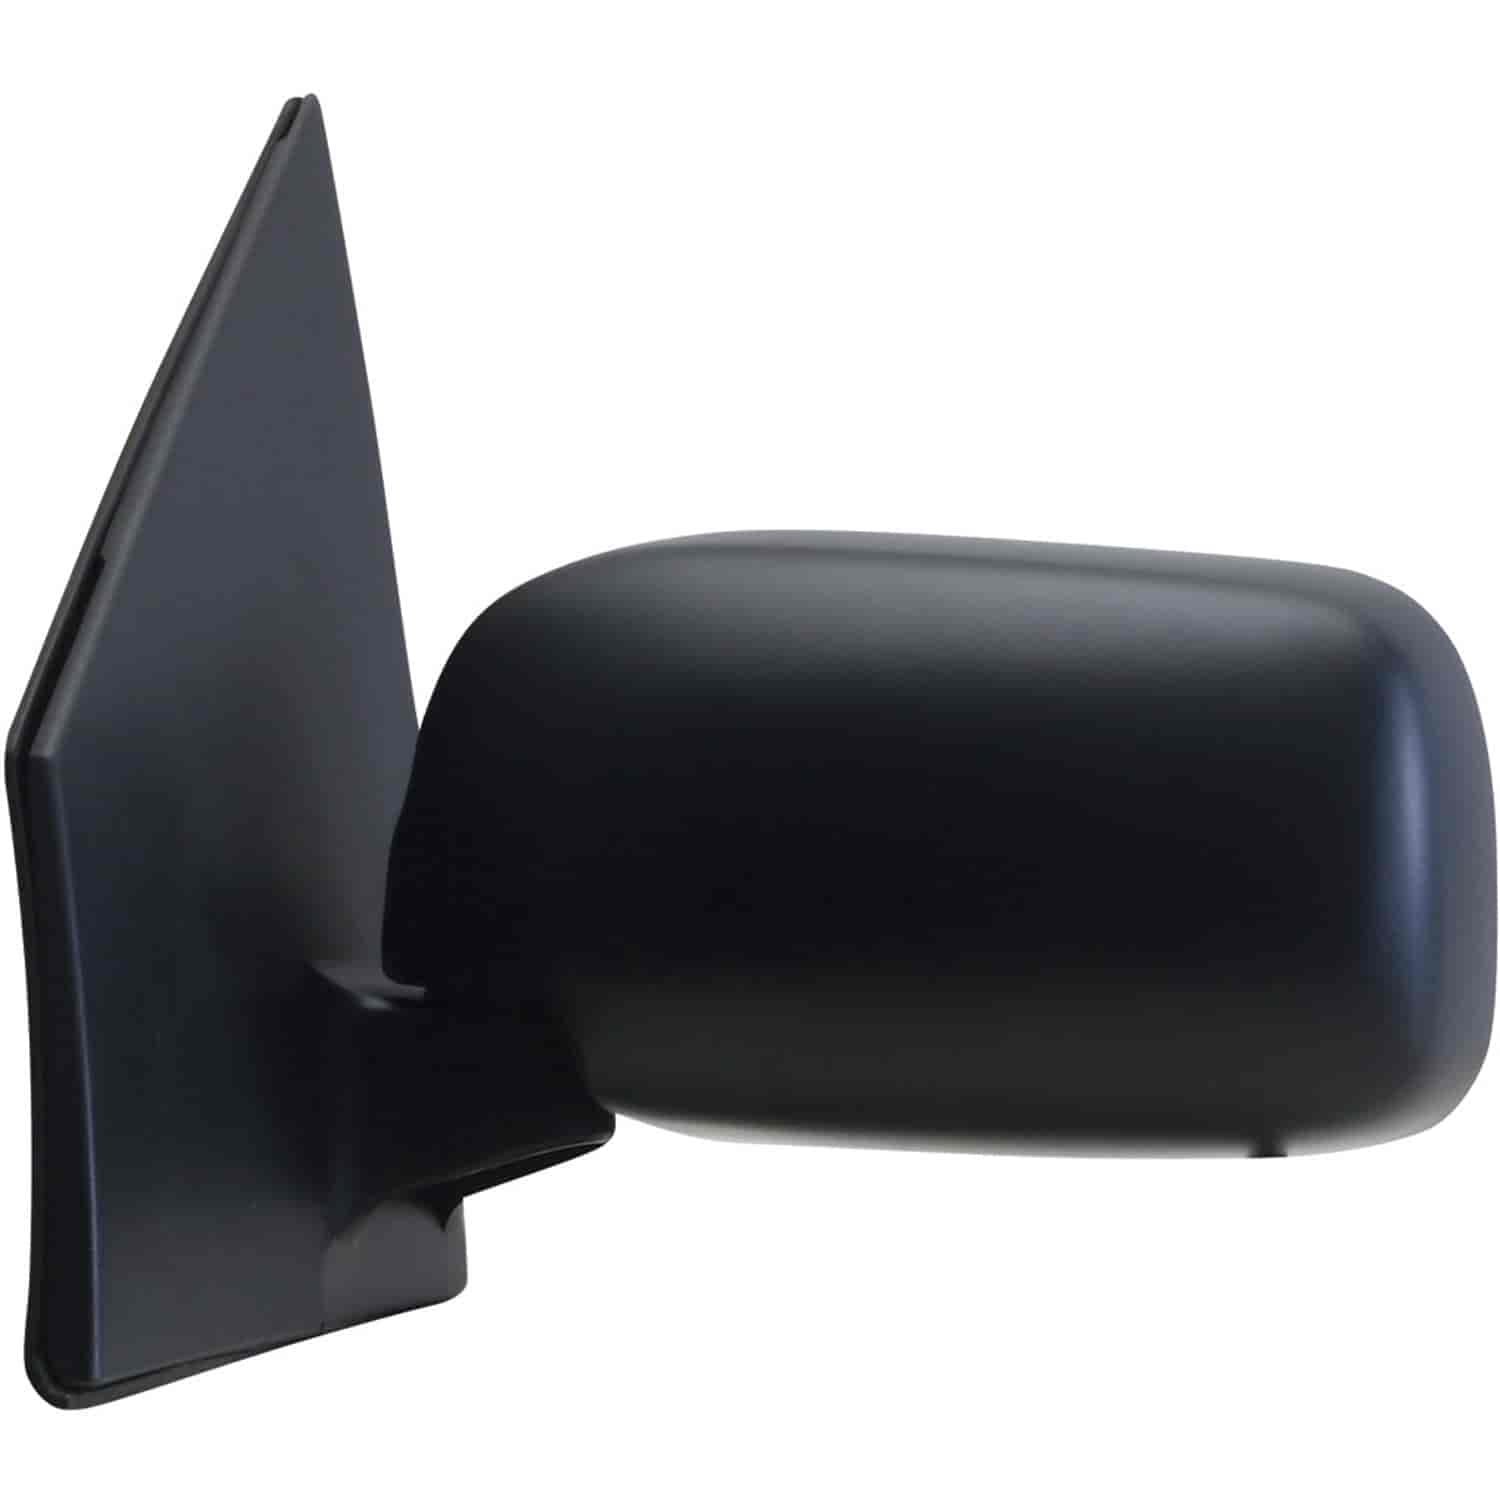 OEM Style Replacement mirror for 00-05 Toyota Echo 2 door/4 door driver side mirror tested to fit an